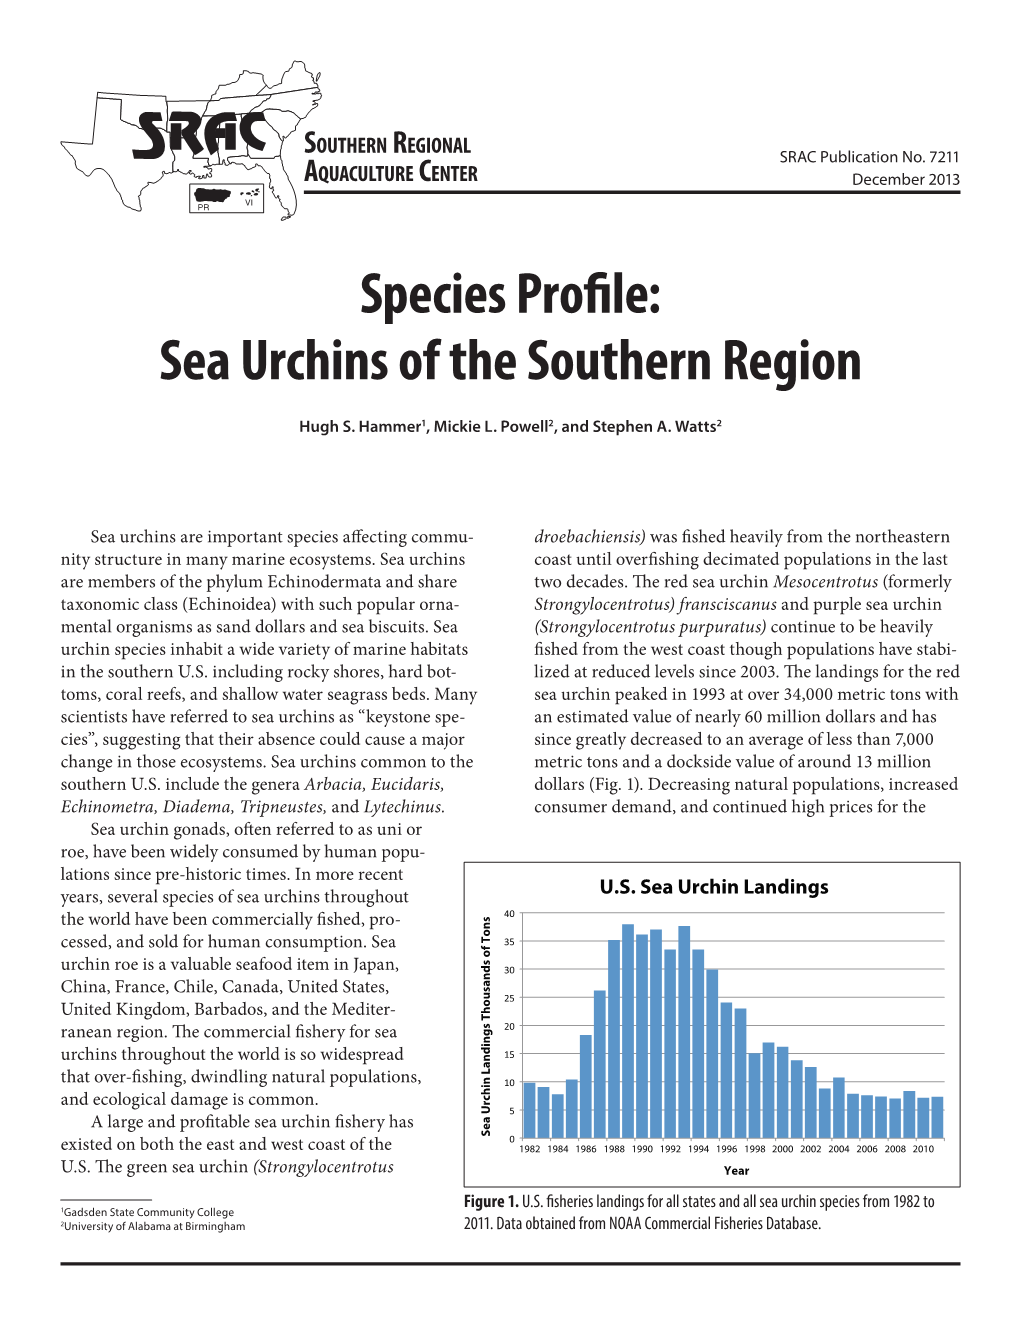 Species Profile: Sea Urchins of the Southern Region